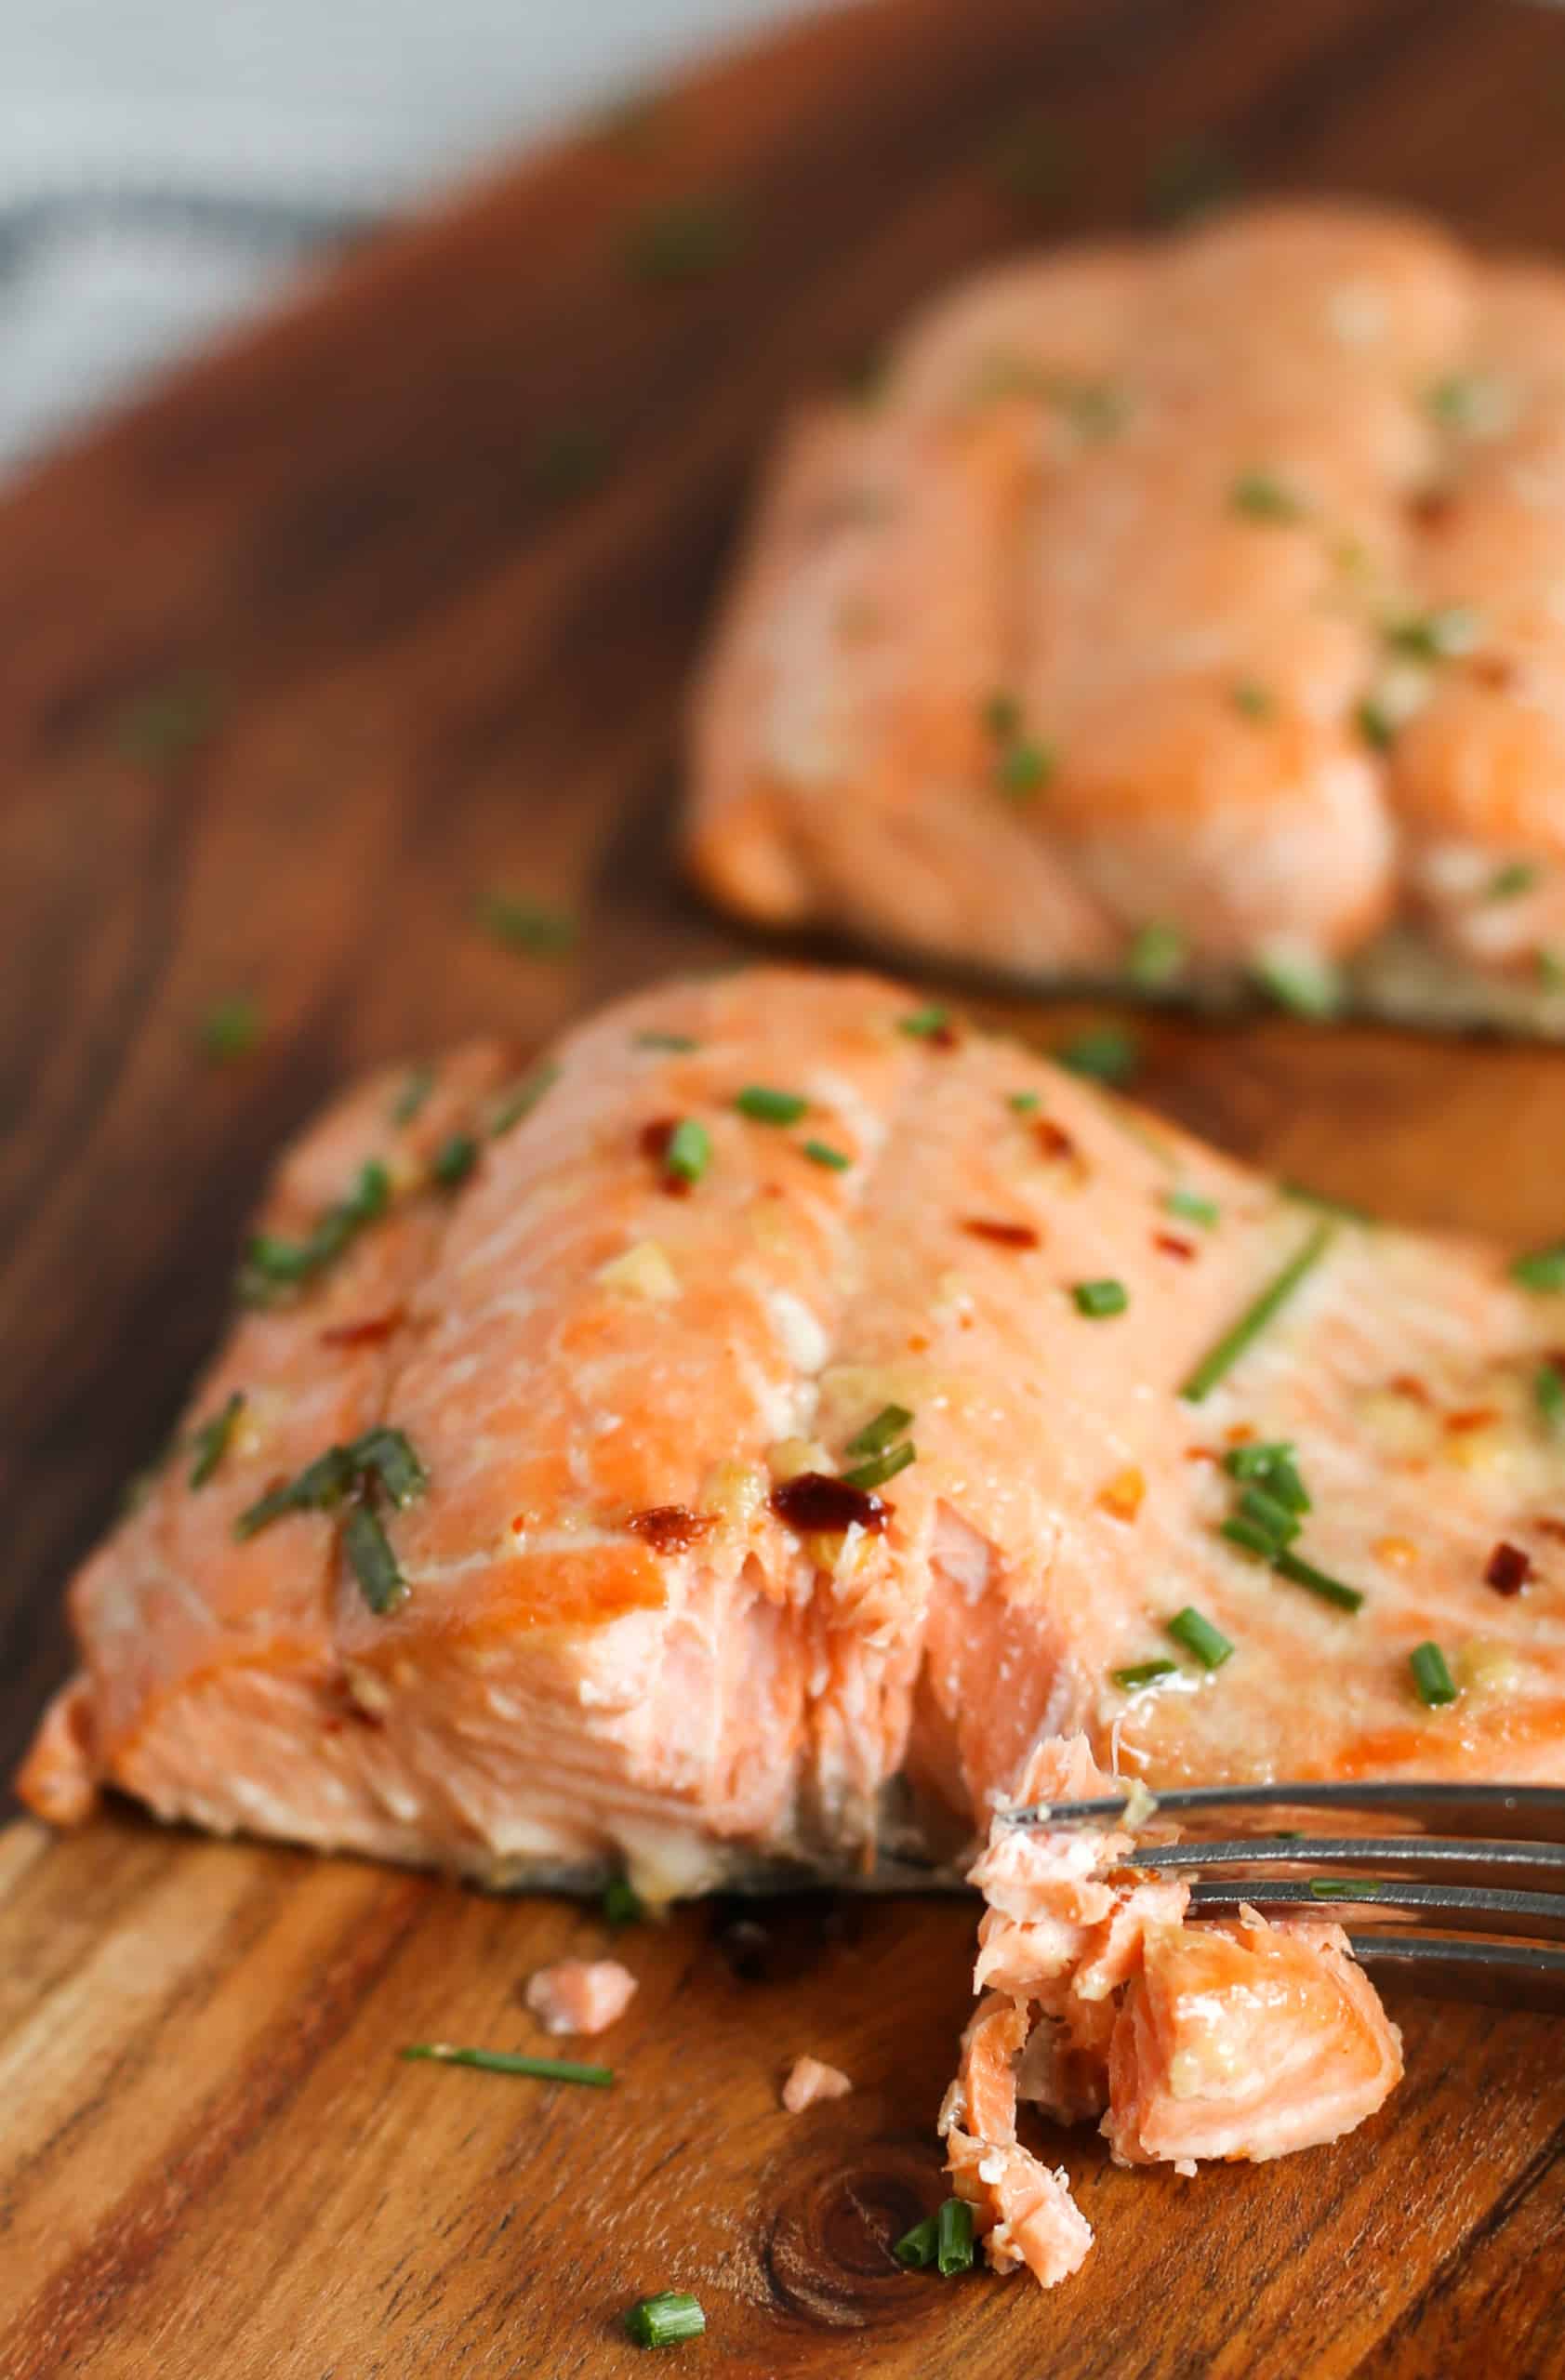 Baked Asian salmon fillets on a wooden chopping block, with a fork removing a bite.